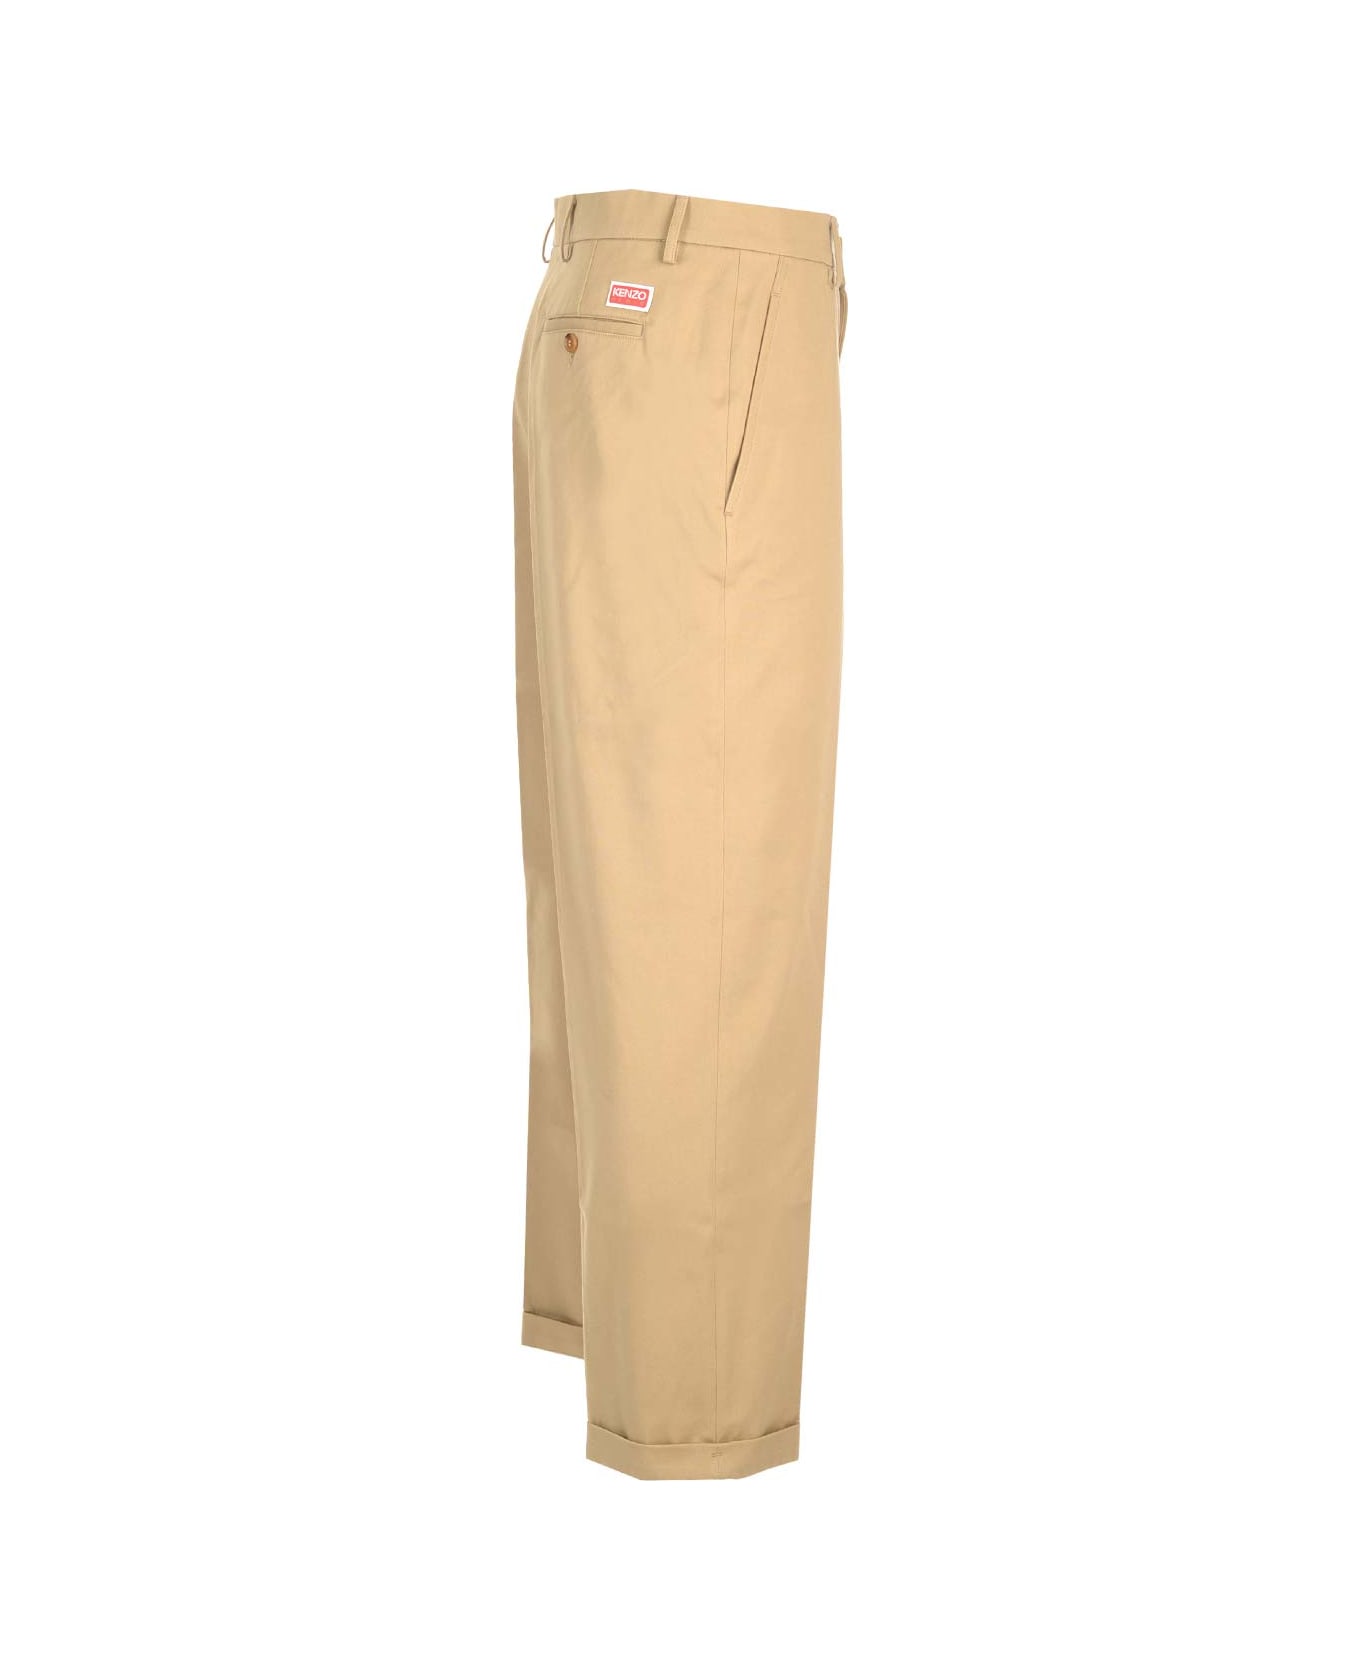 Kenzo Cotton Trousers - Beige ボトムス